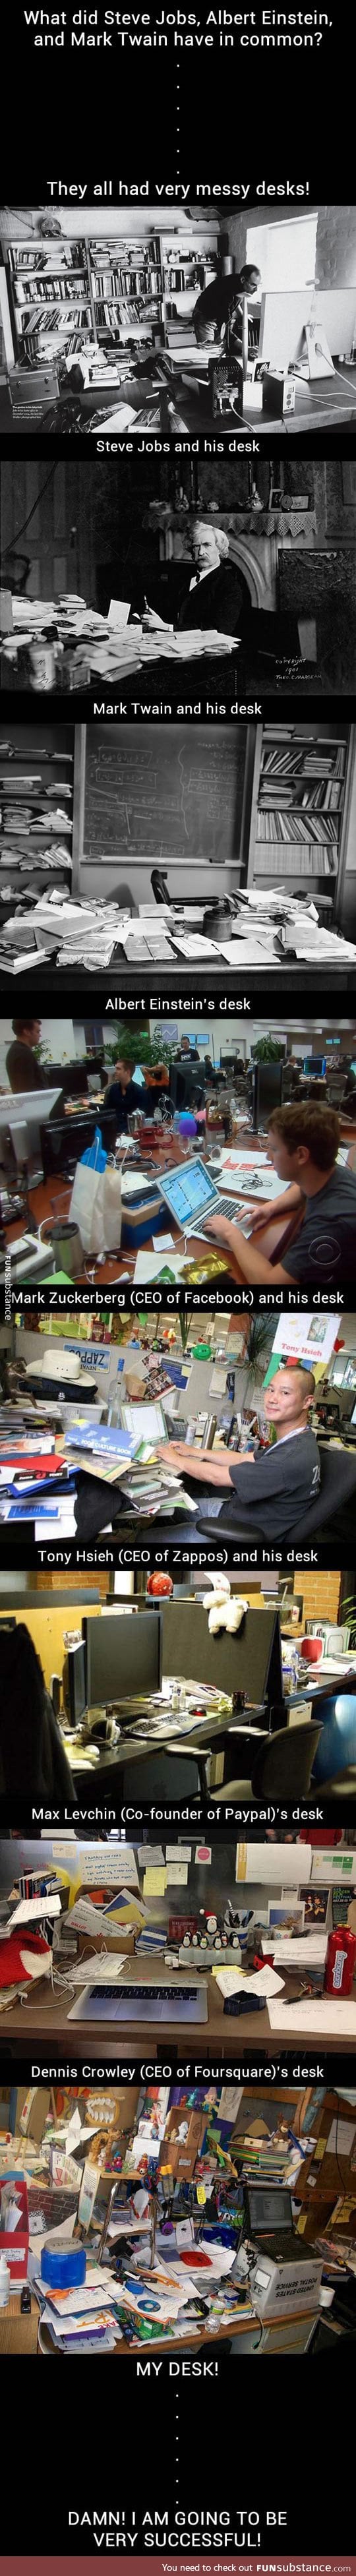 Successful people who have messy desks